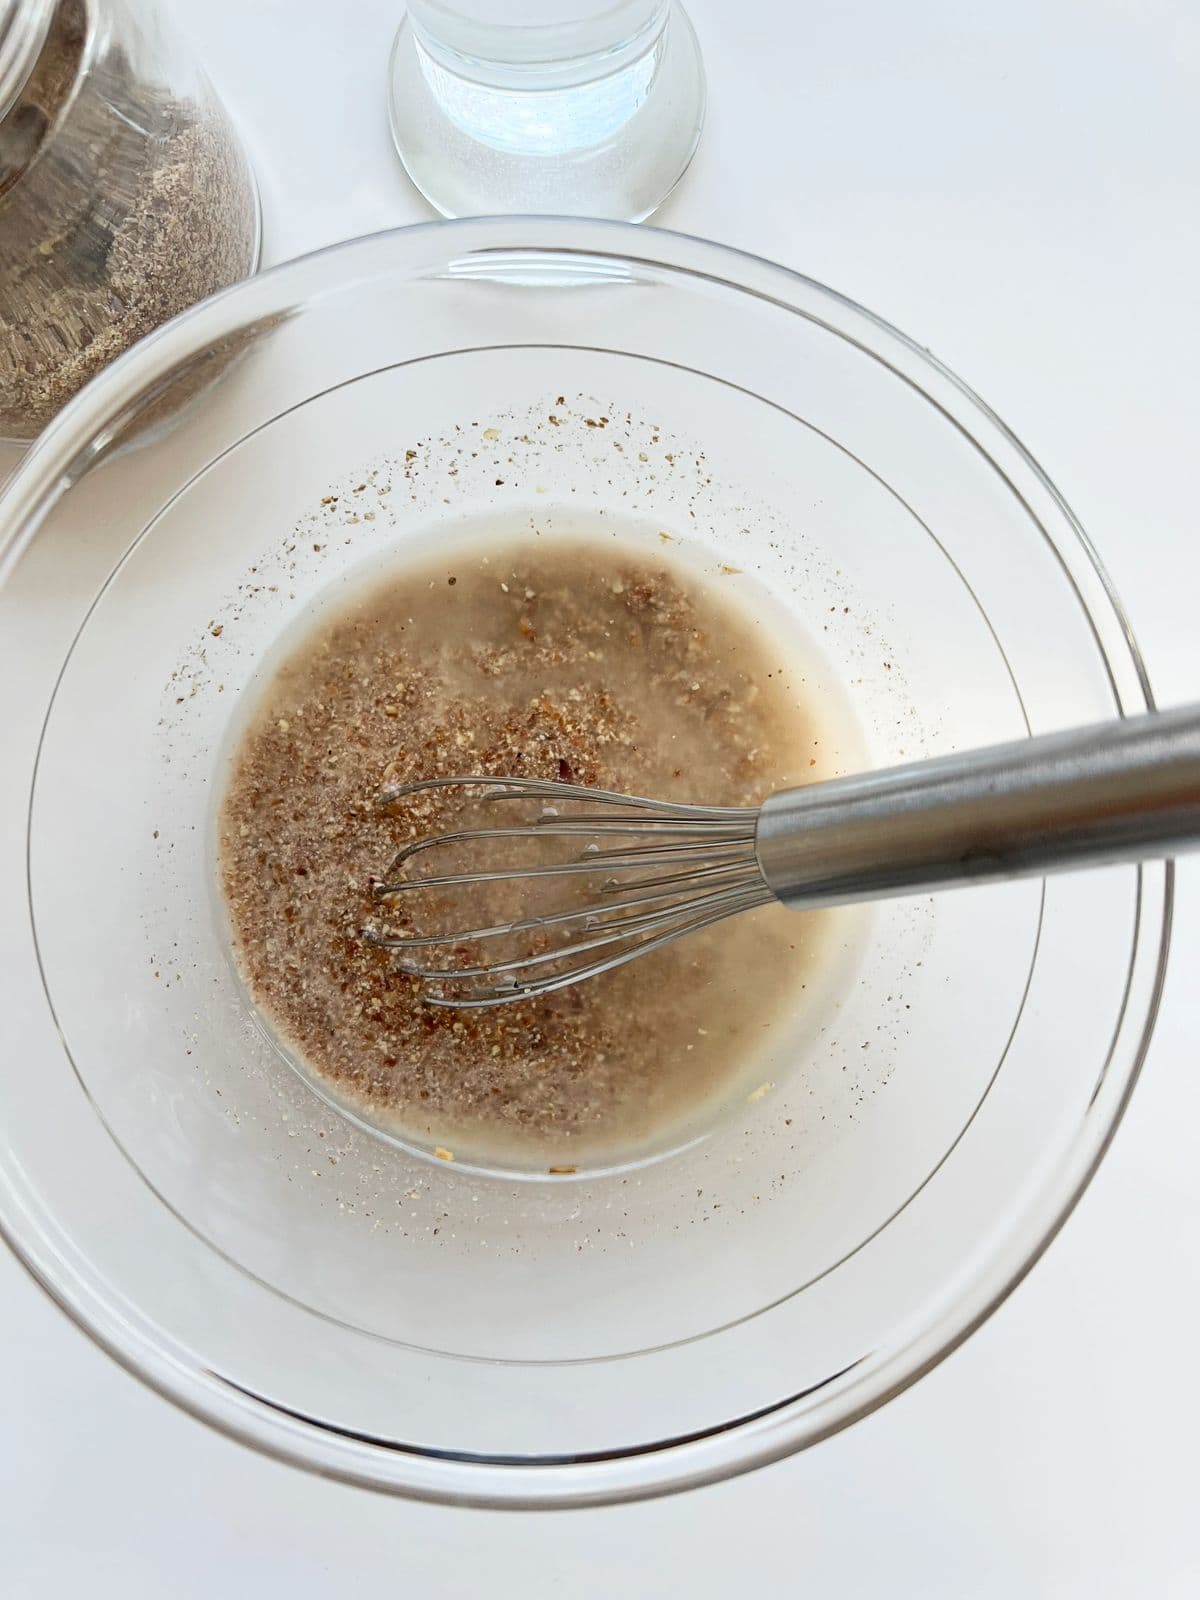 An image of ground flaxseed and water mixed together in a glass bowl with a silver whisk.